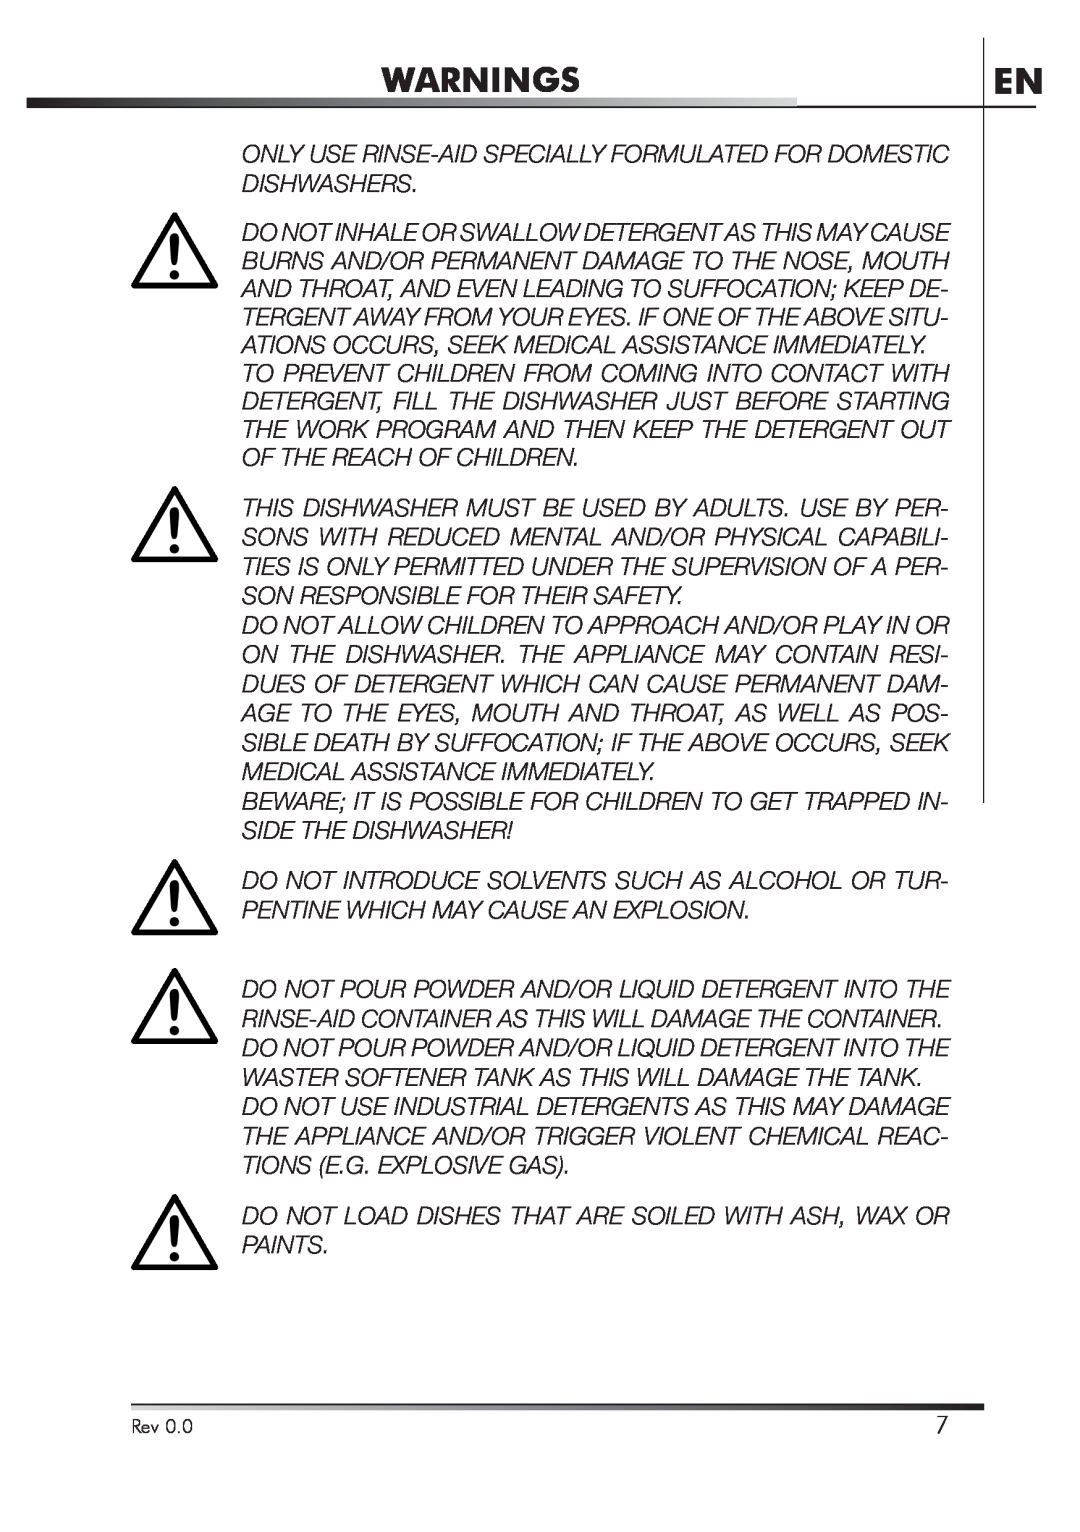 Smeg STA4645 instruction manual Warnings, Only Use Rinse-Aid Specially Formulated For Domestic Dishwashers 